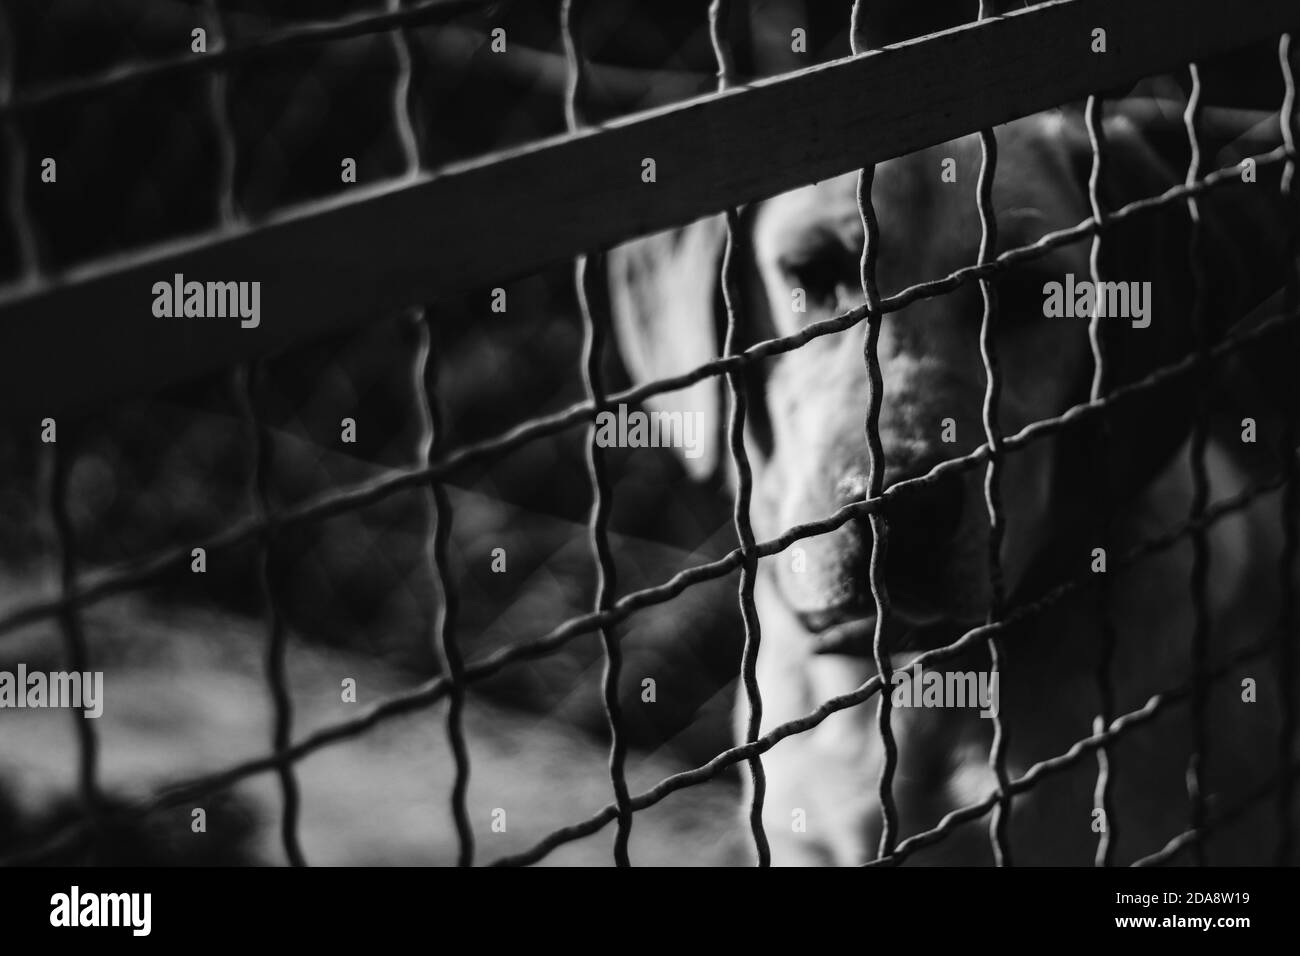 Unhappy dog sitting behind the metal fence in a refuge, animal abuse concept, black and white image. Stock Photo